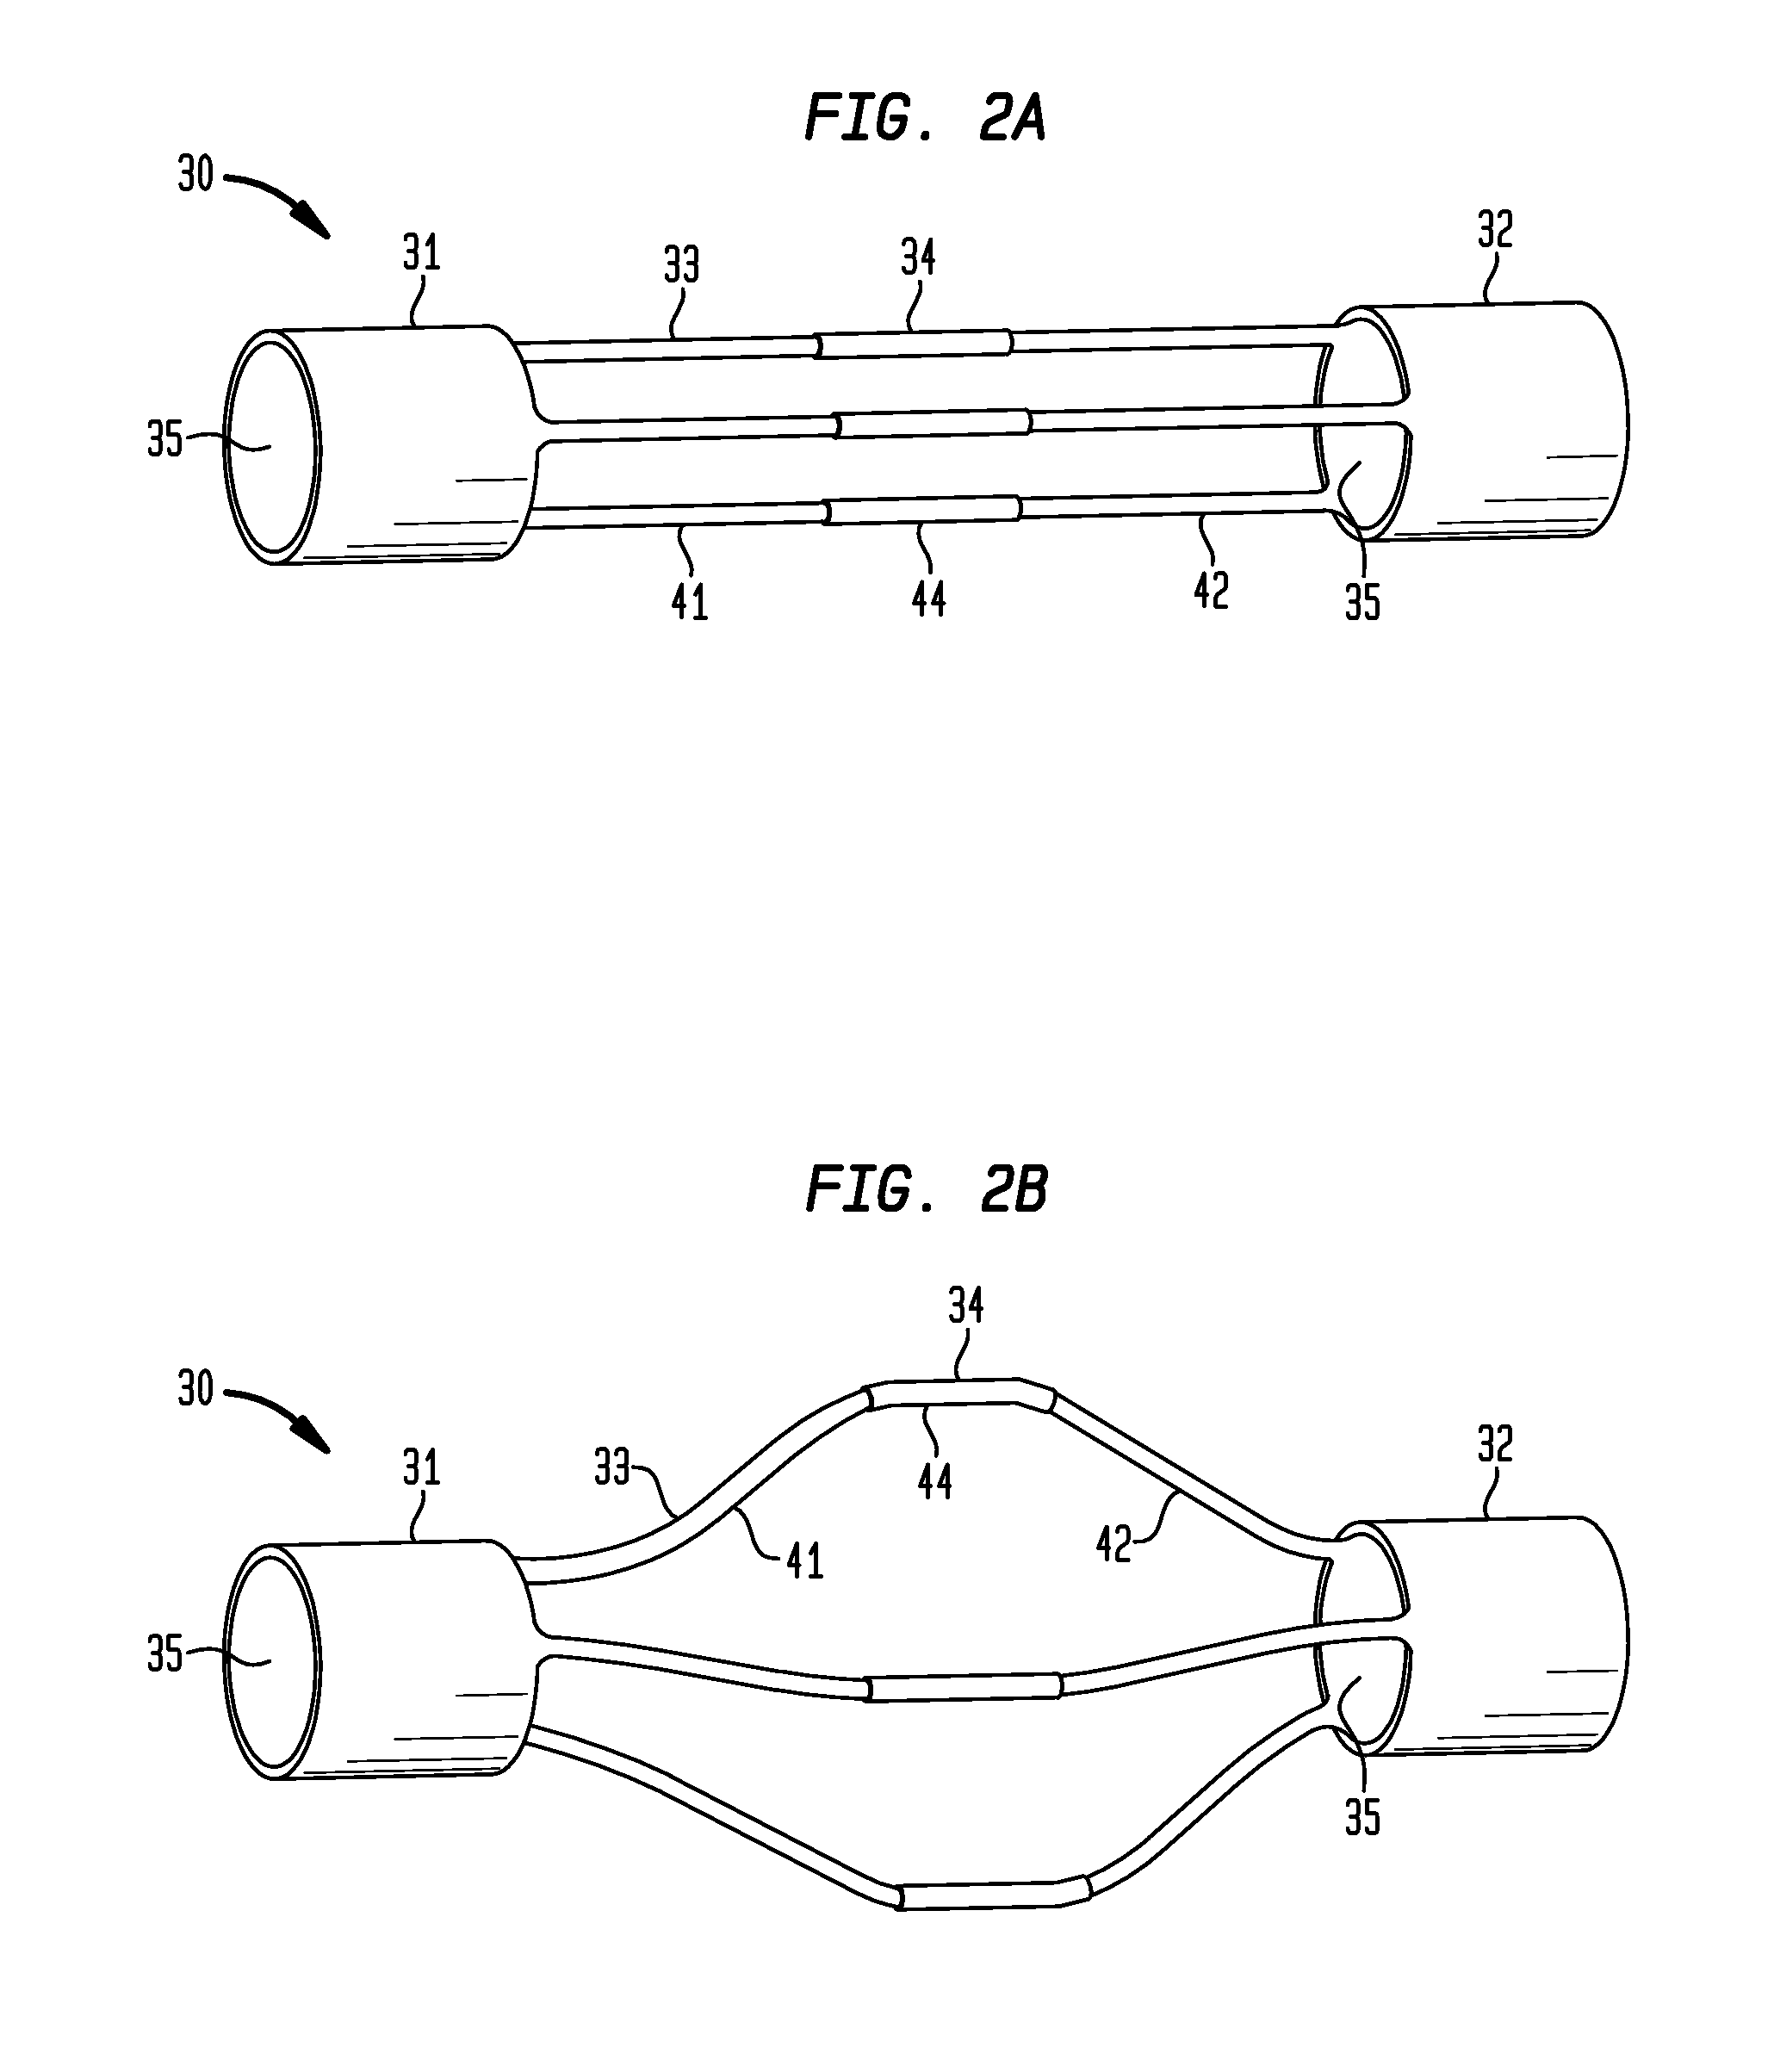 Expandable radiopaque marker for transcatheter aortic valve implantation